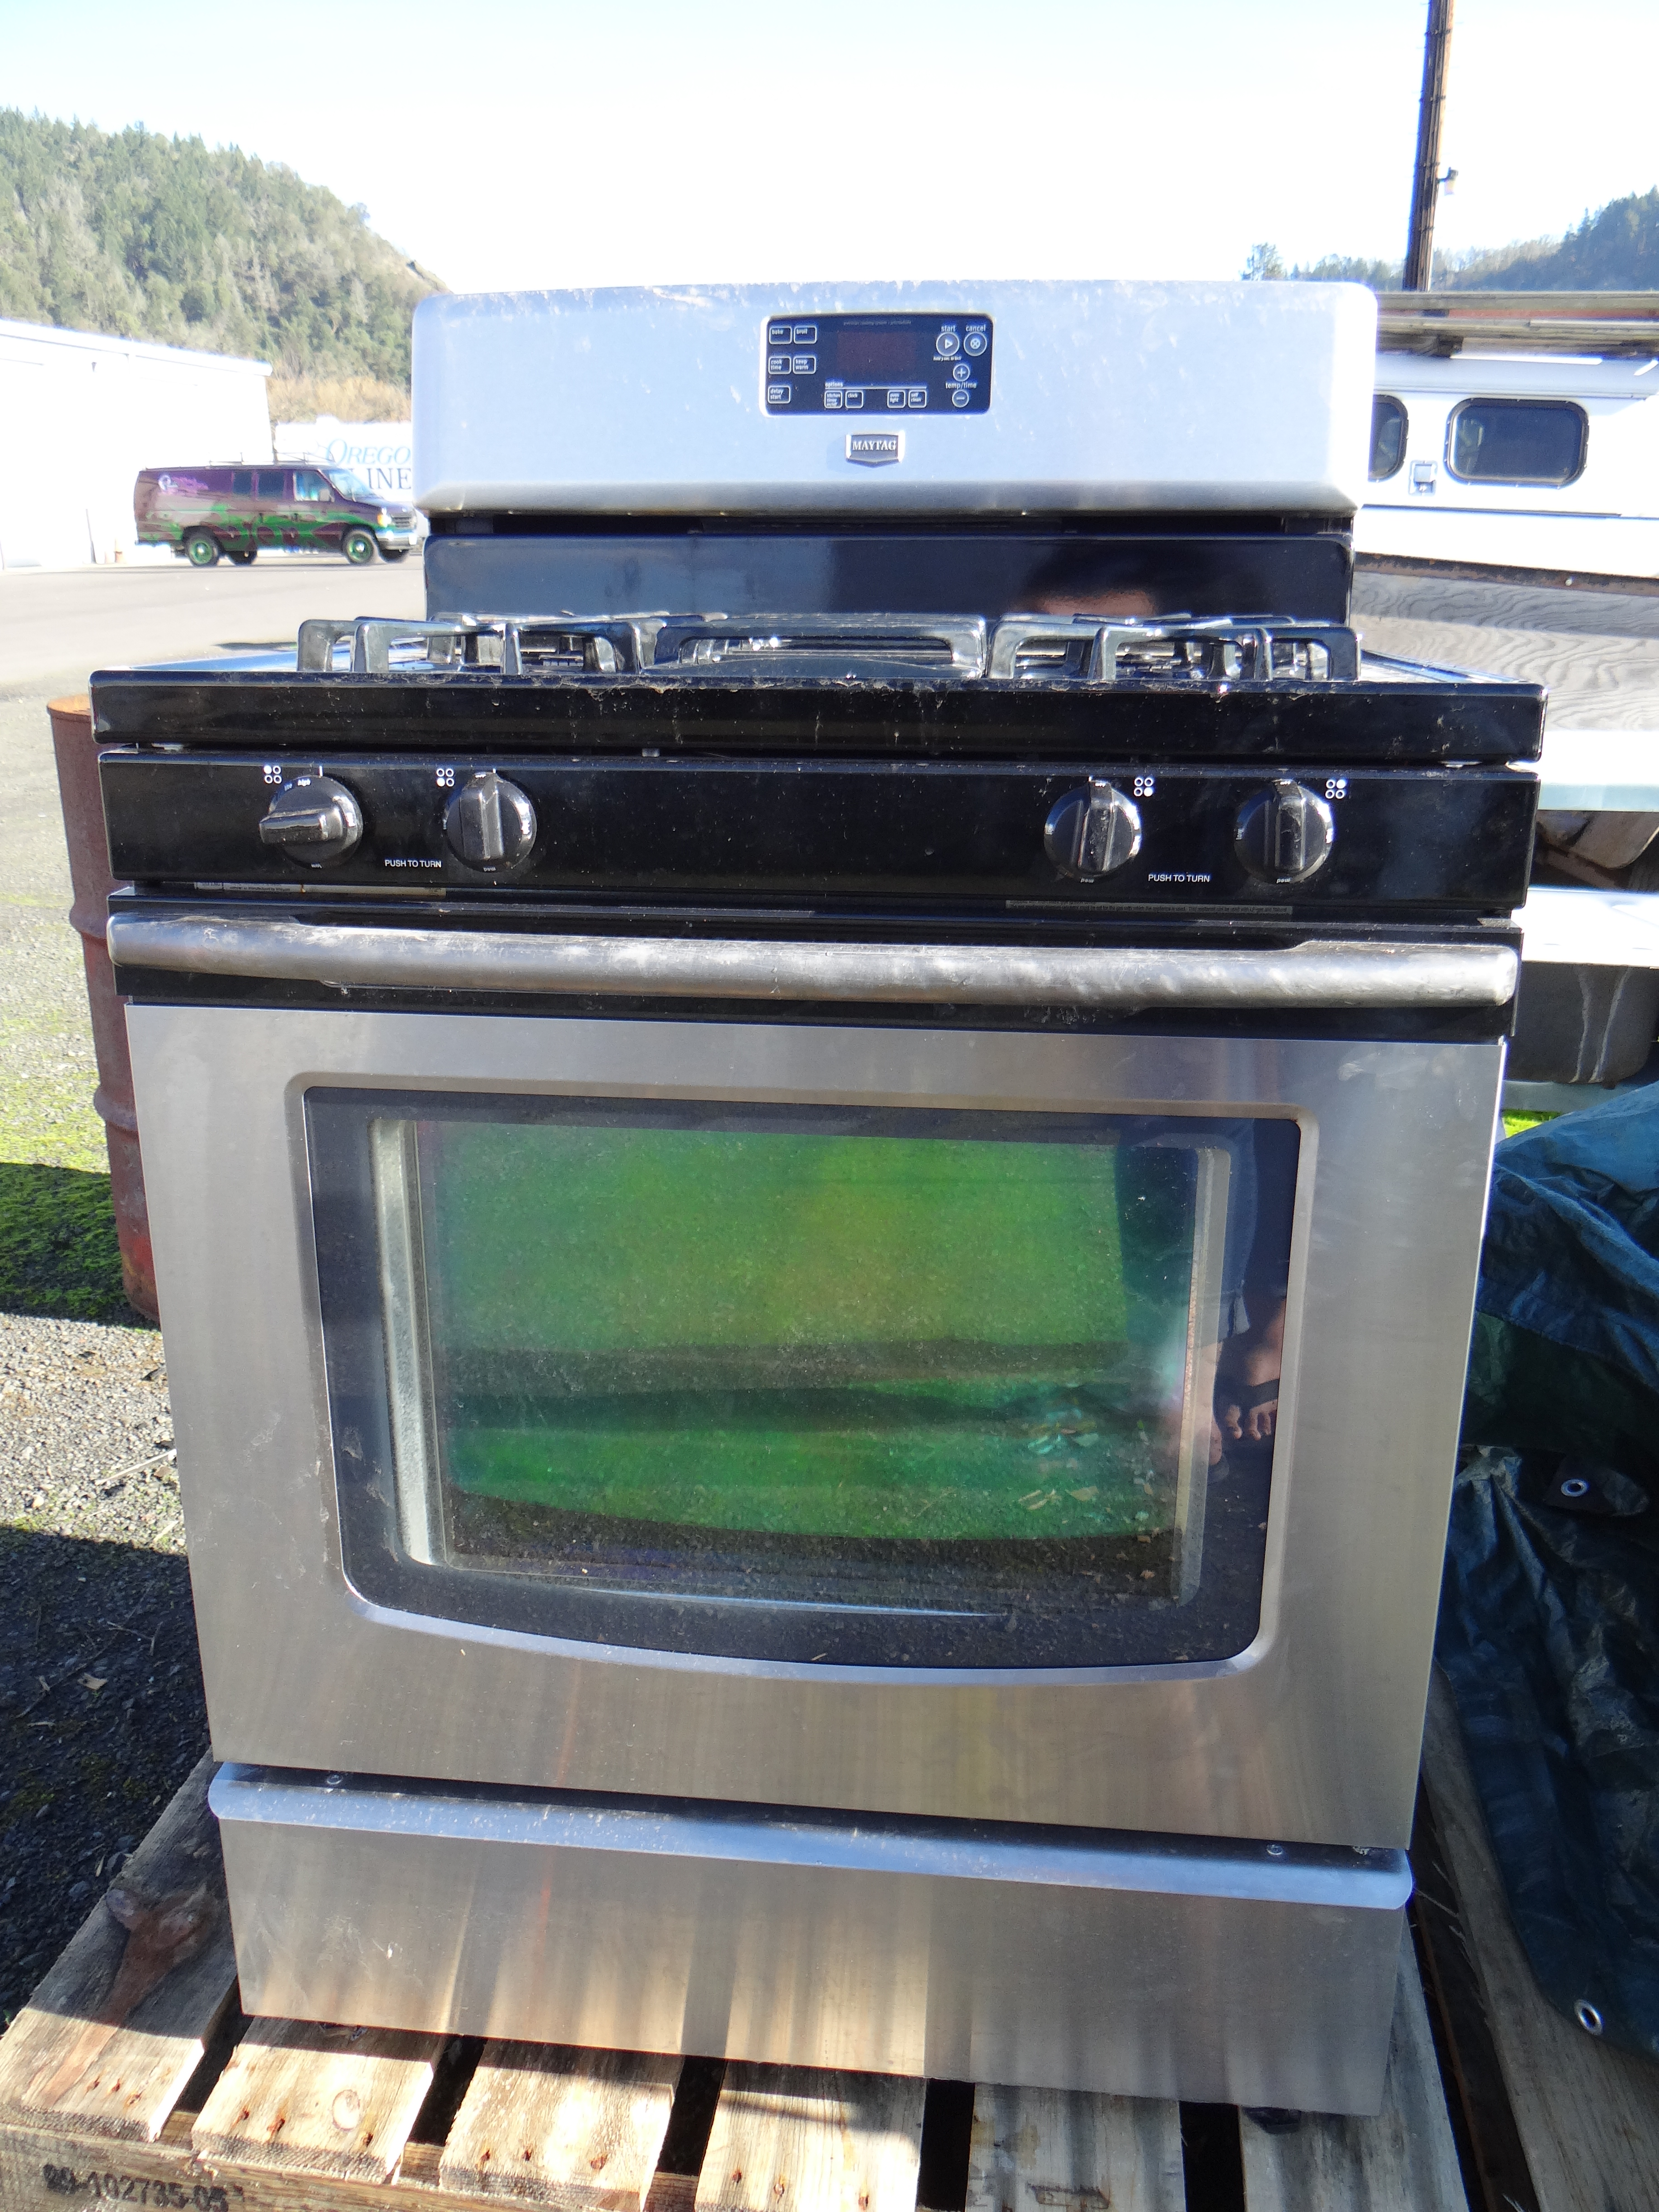 XX102-Maytag Gas Range Model MGR7662XS2 (need new igniter for oven, easy fix)